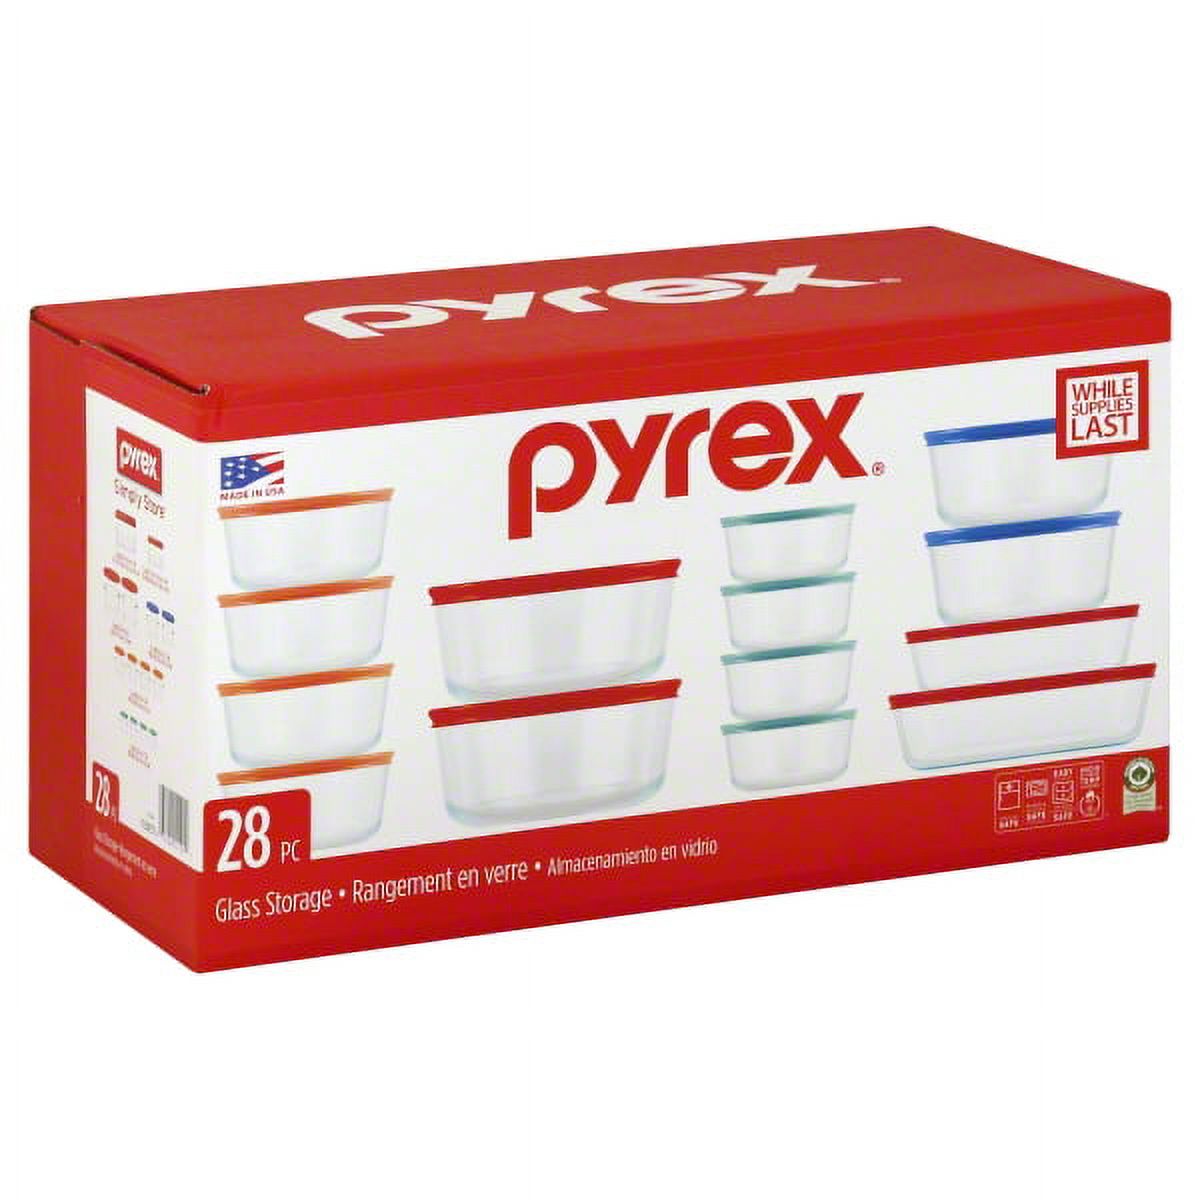 Pyrex Simply Food Storage & Bakeware Set with Colored Lids, 28 Piece - image 2 of 7